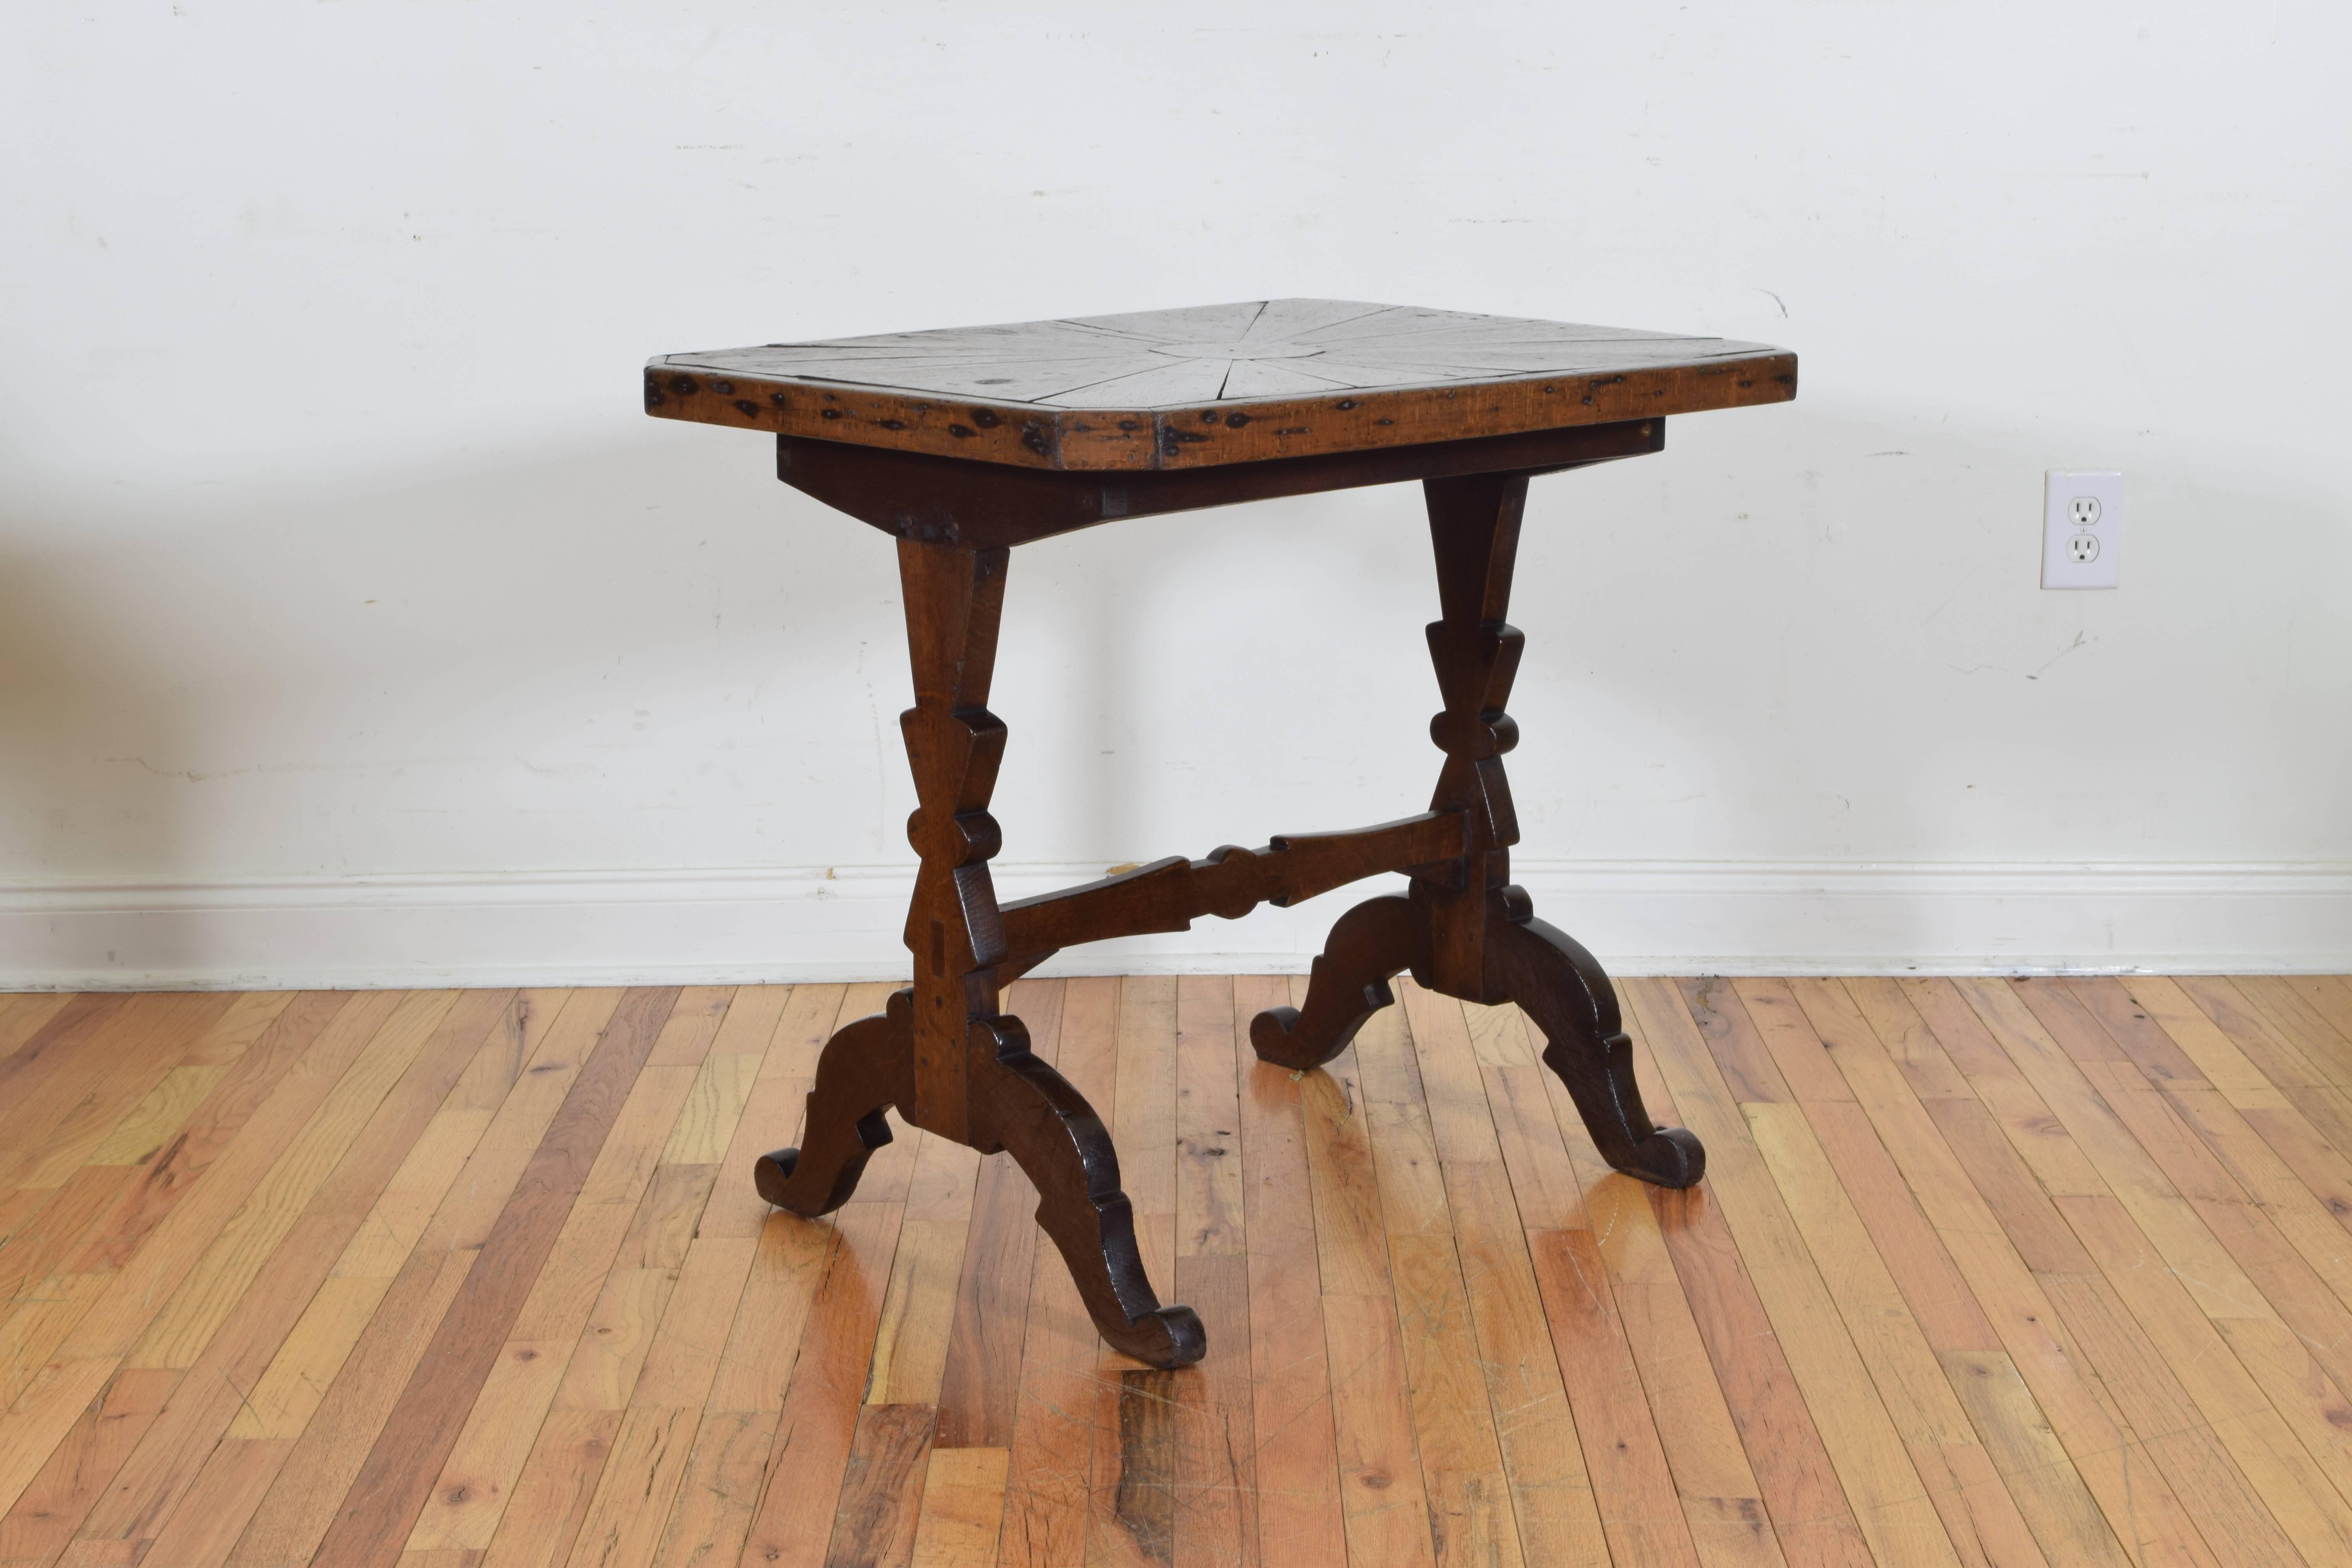 Having a rectangular top with canted corners, the veneers covering it radiating from a central sphere, raised on shaped trestle form legs connected by a shaped stretcher, a wonderful example of 